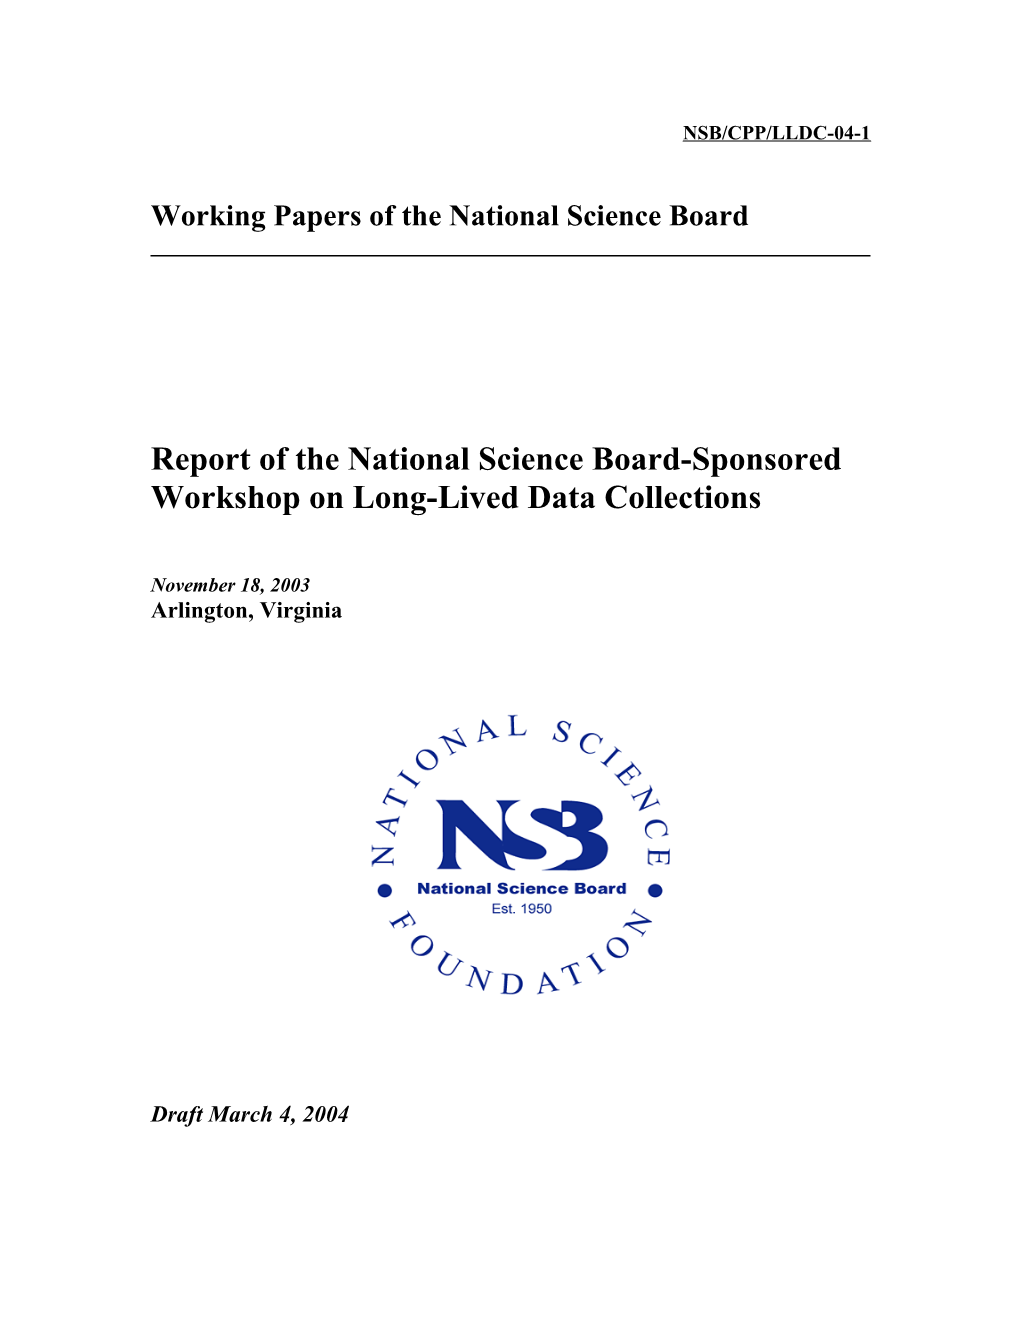 Working Papers of the National Science Board